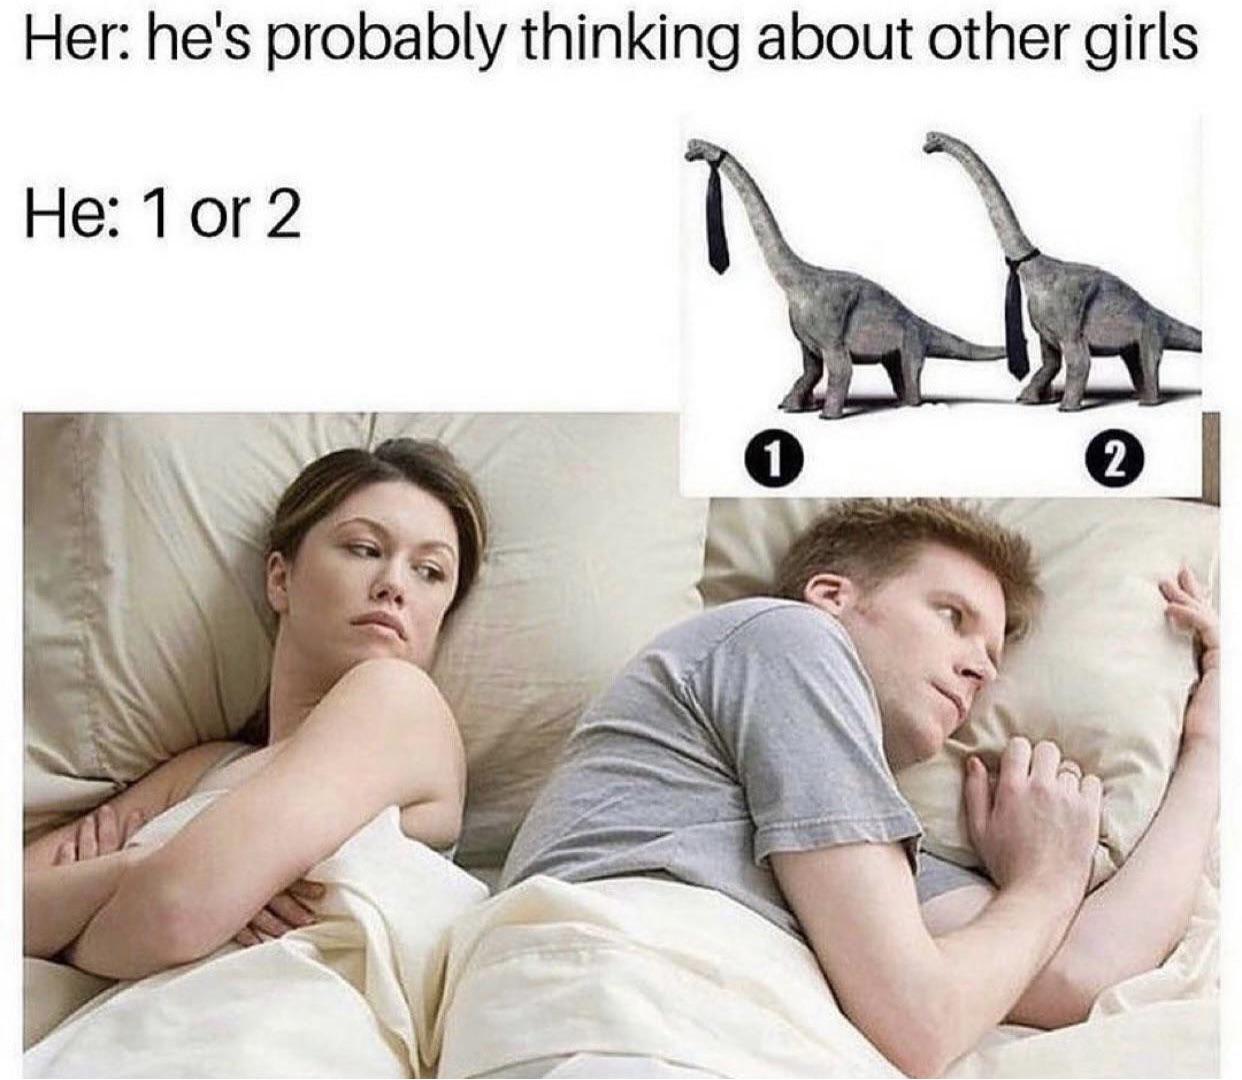 funny memes - dank memes - he's probably thinking about other girls meme - Her he's probably thinking about other girls He 1 or 2 1 2